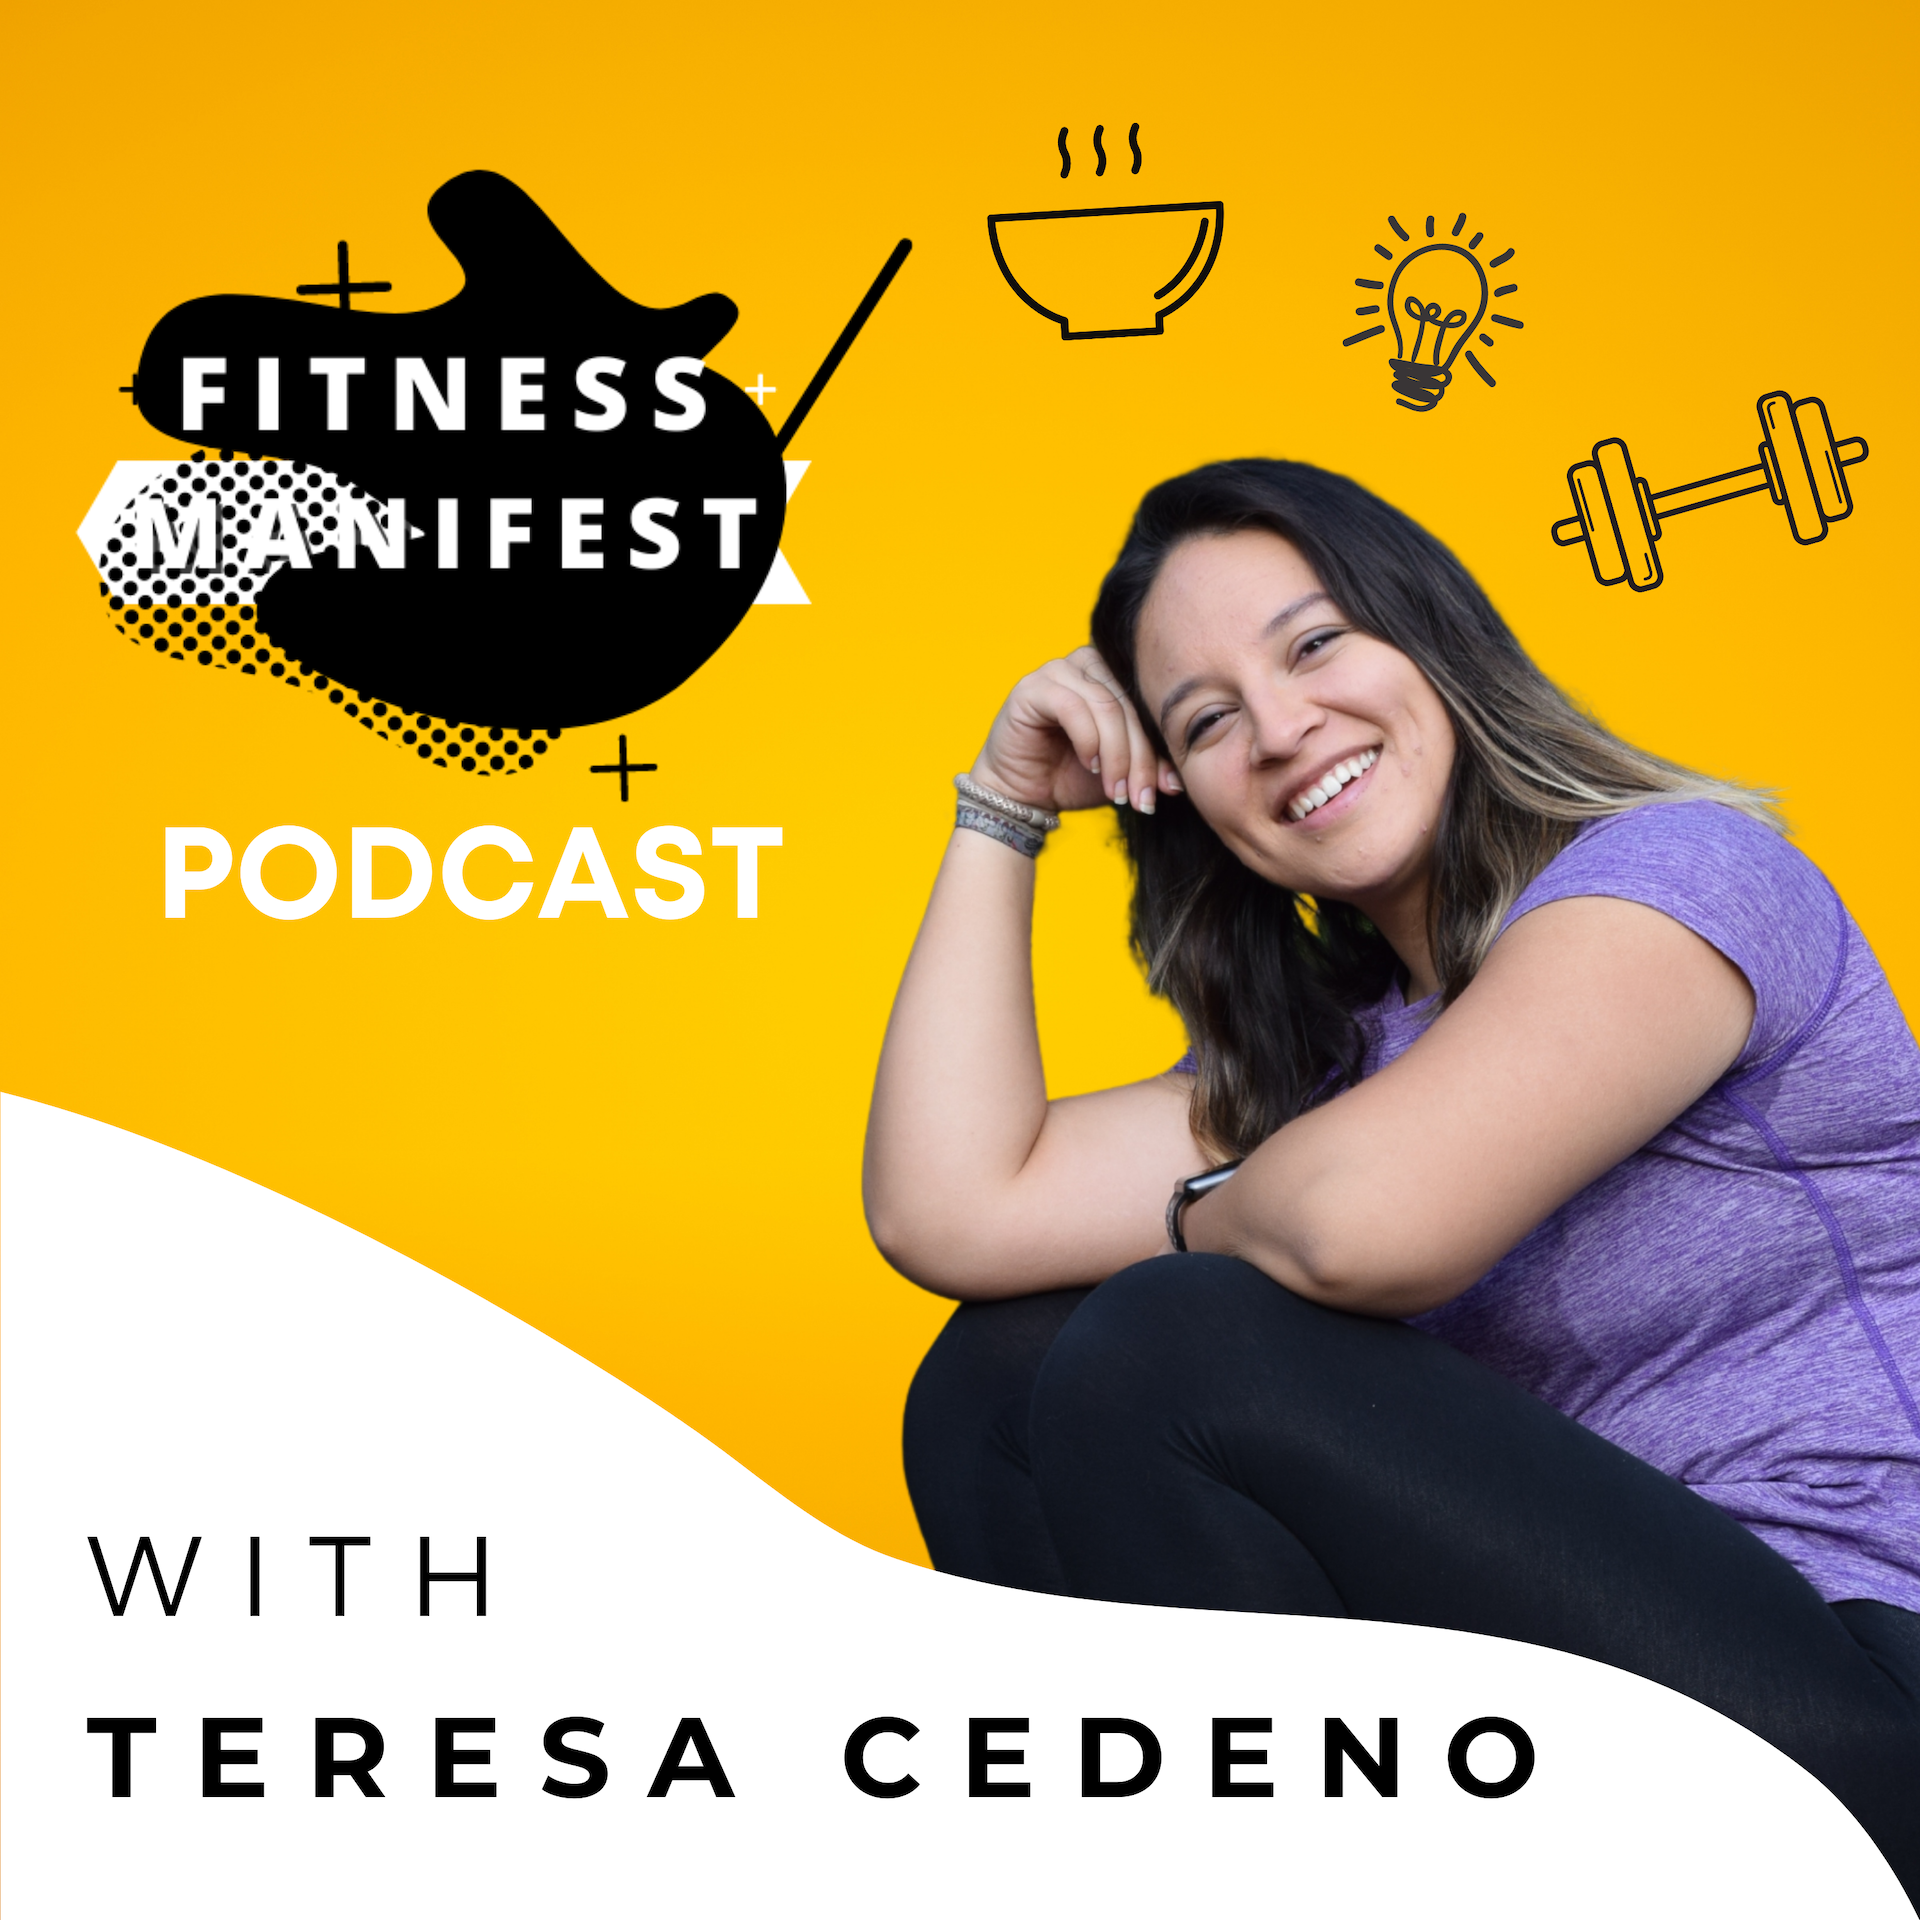 39. Fire-side chat: What is Functional Fitness?